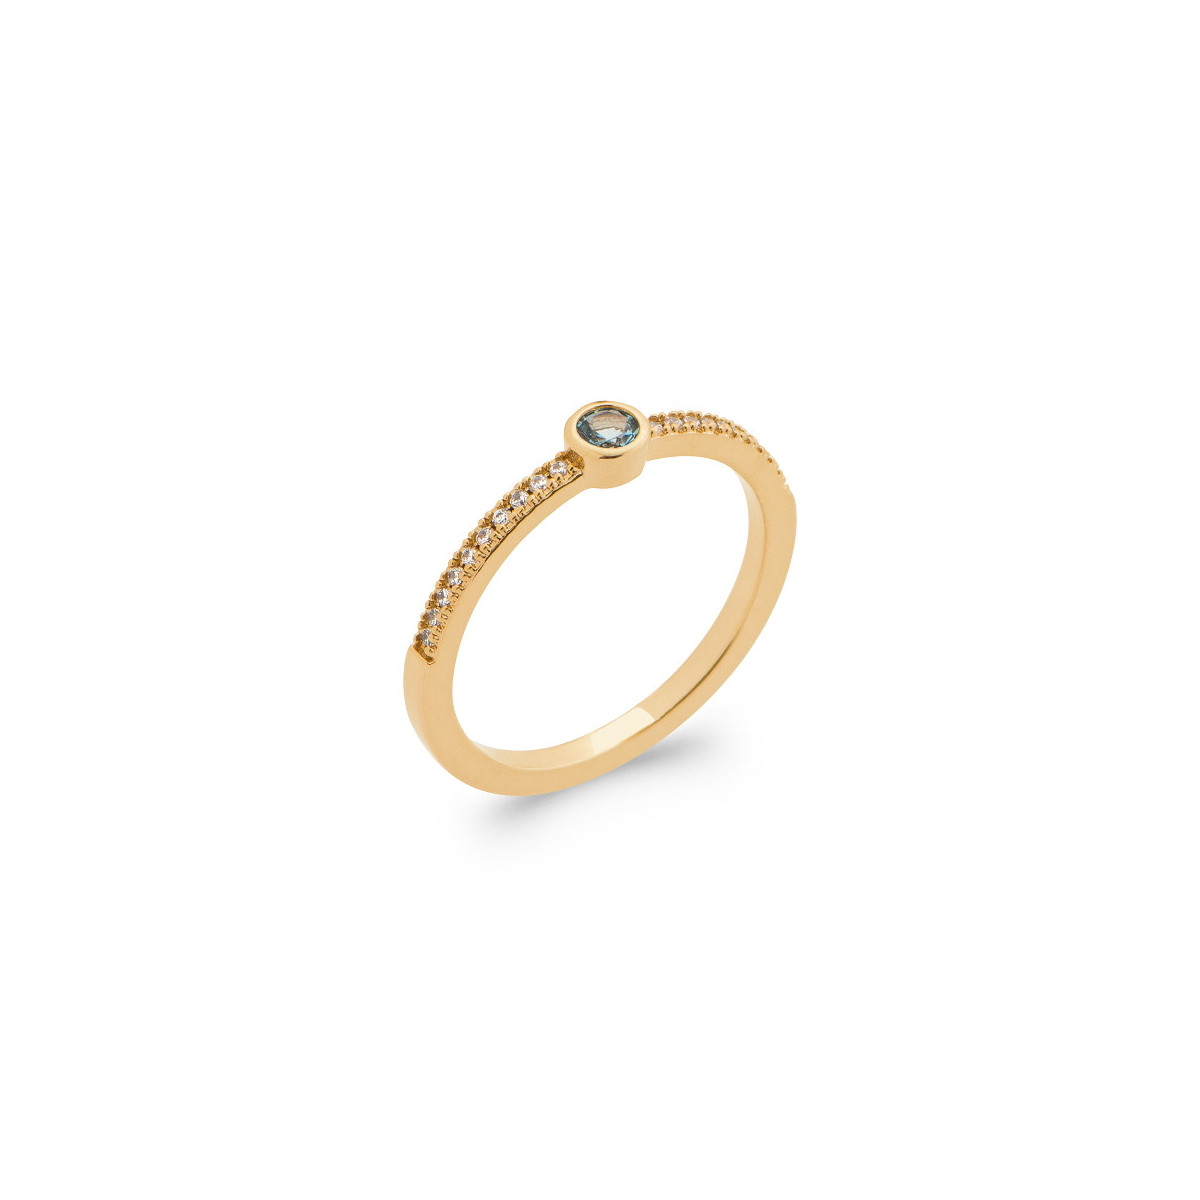 GOLD PLATED SILVER RING WITH BICOLOUR ZIRCONIAS